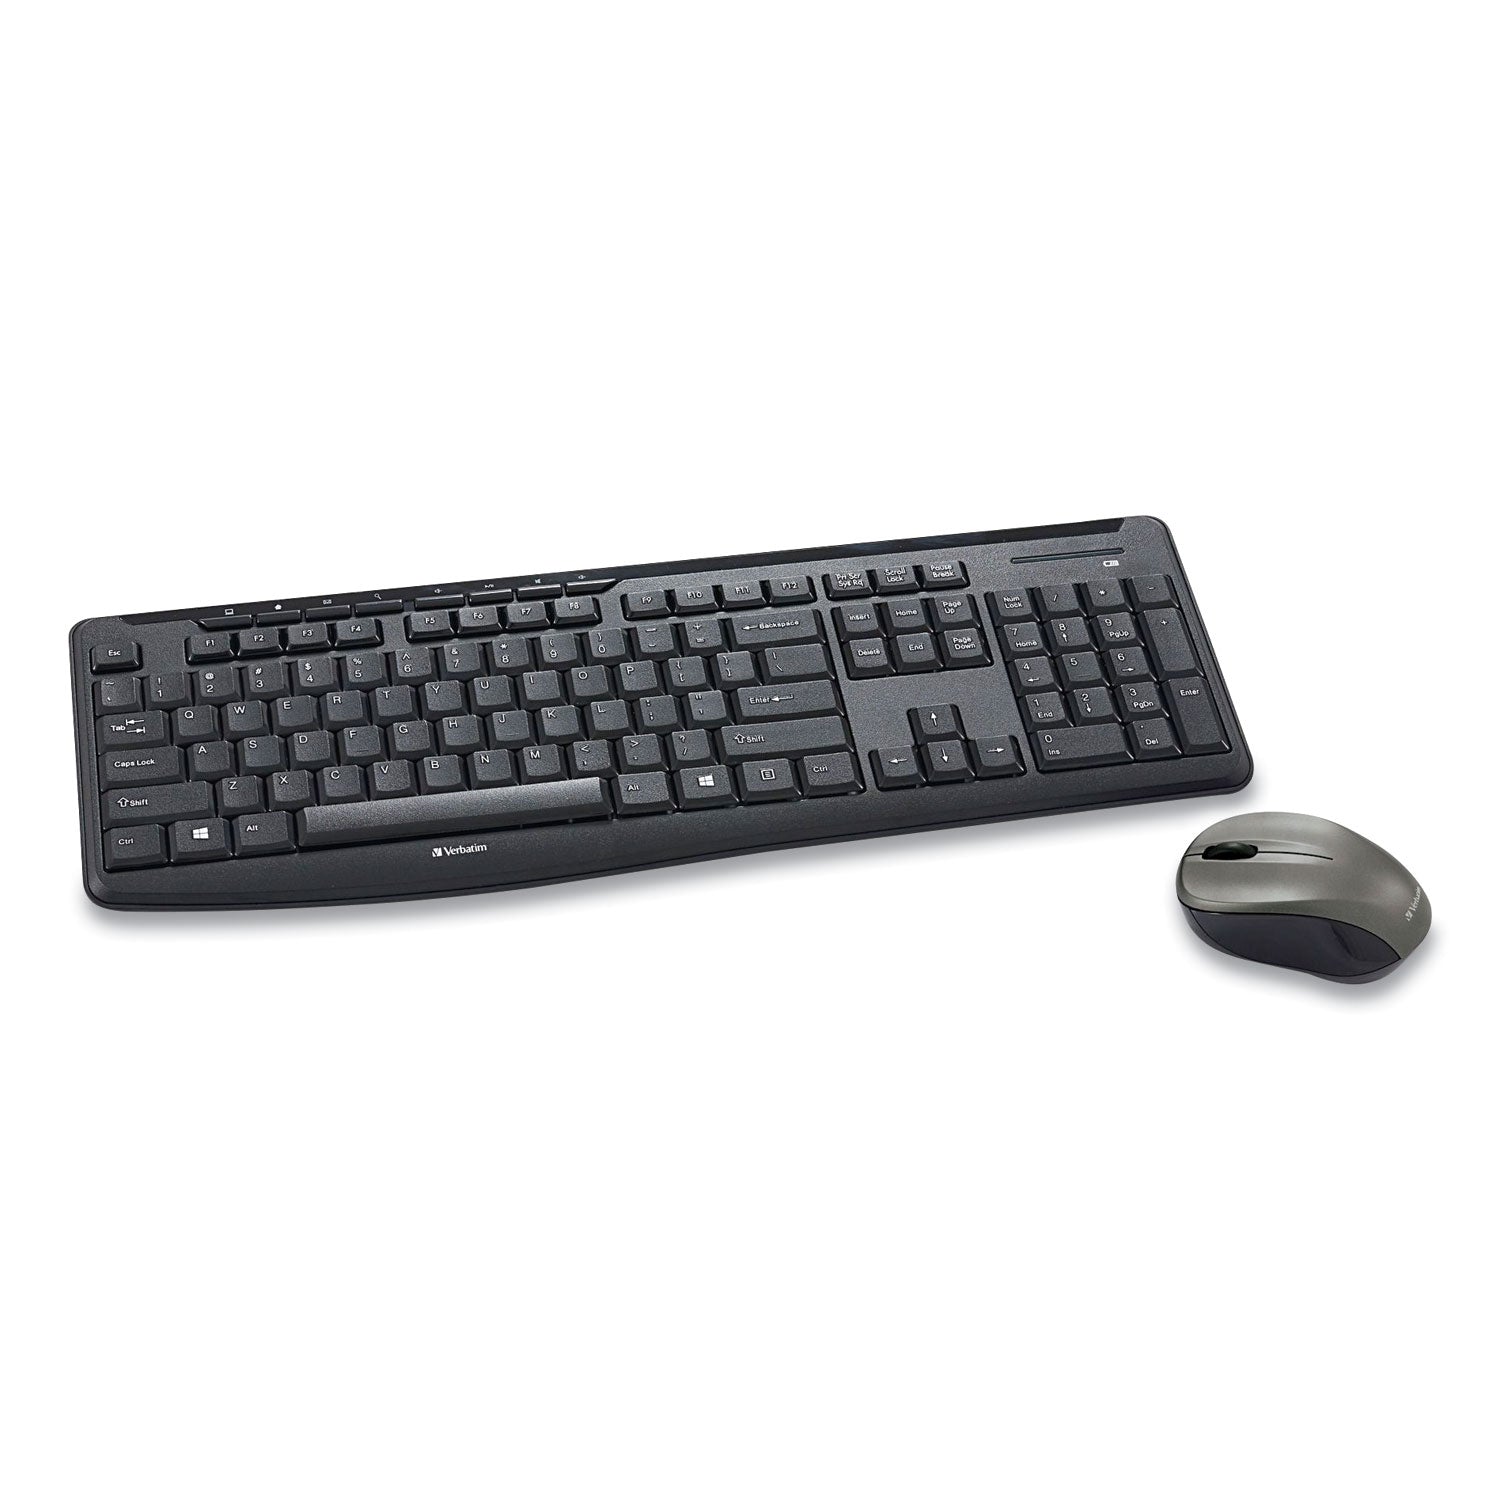 silent-wireless-mouse-and-keyboard-24-ghz-frequency-328-ft-wireless-range-black_ver99779 - 1